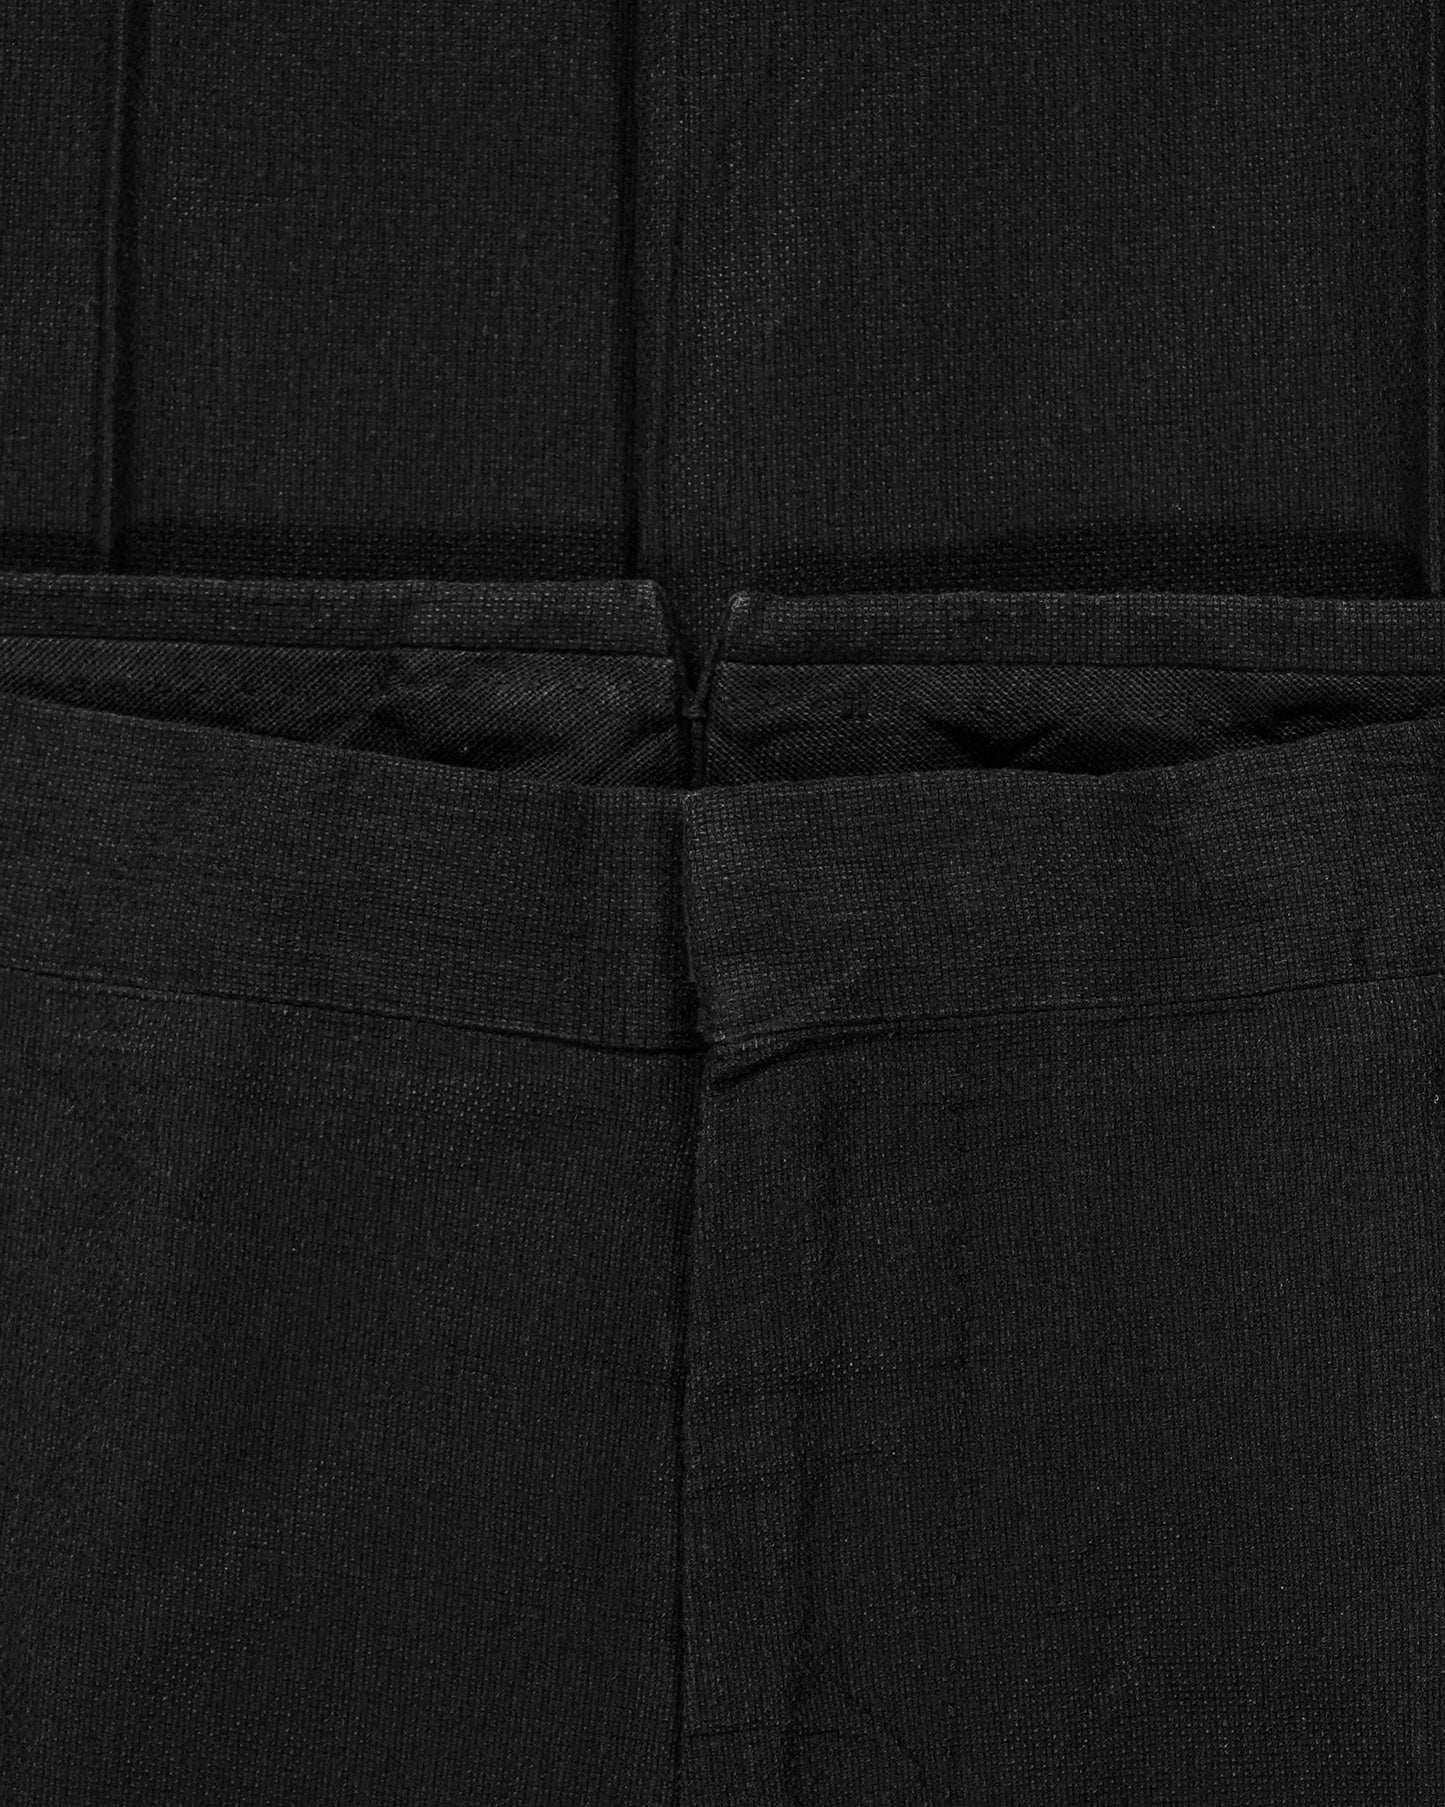 Carol Christian Poell Waxed Trousers - SS02 “Traditional Escape” (PM/1603 WARP)